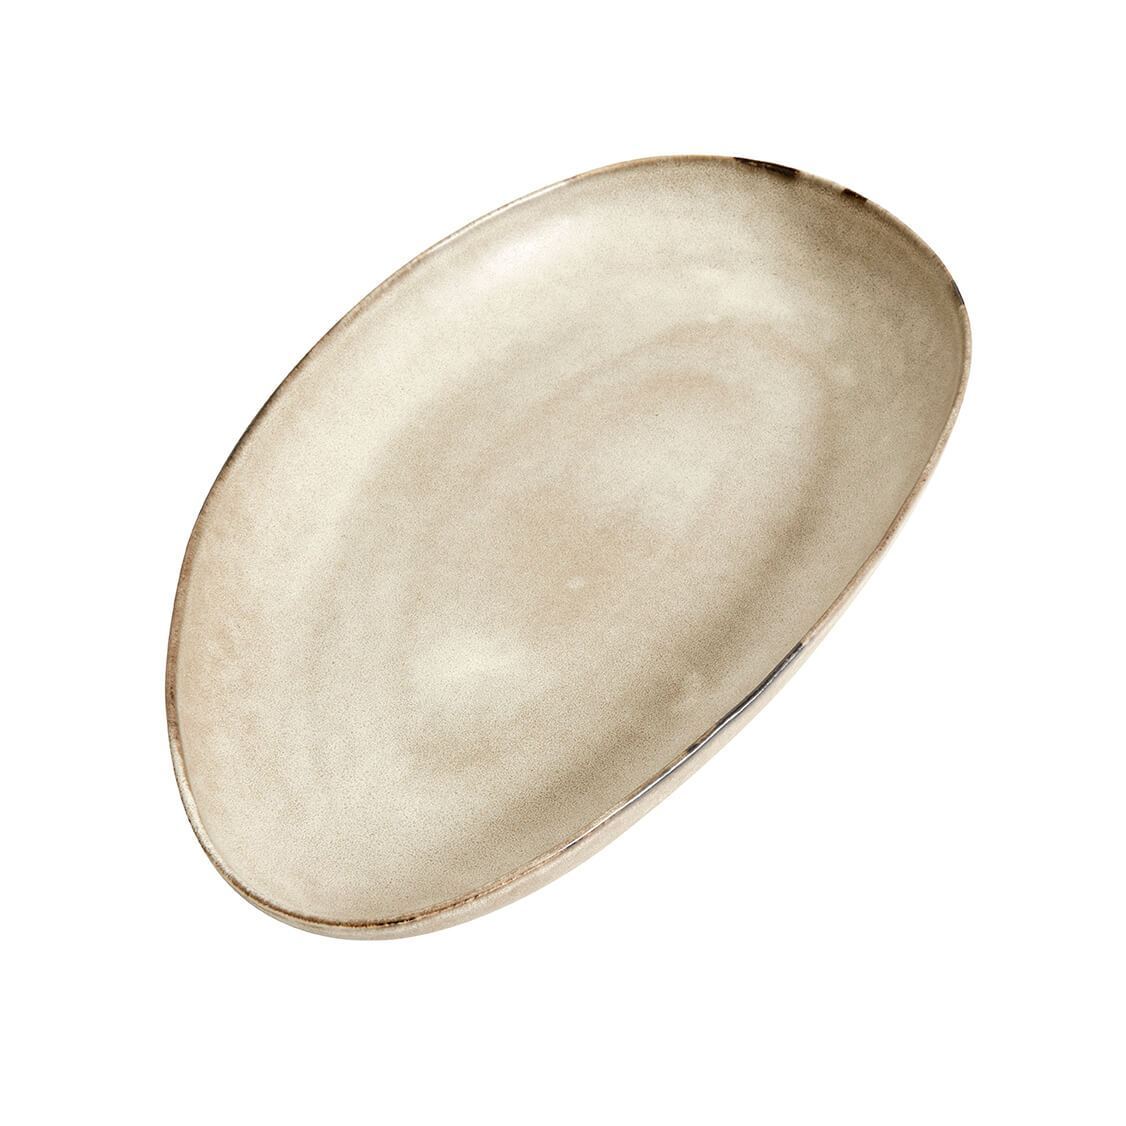 Muubs Mame Serving Plate Oval Oyster, 43cm